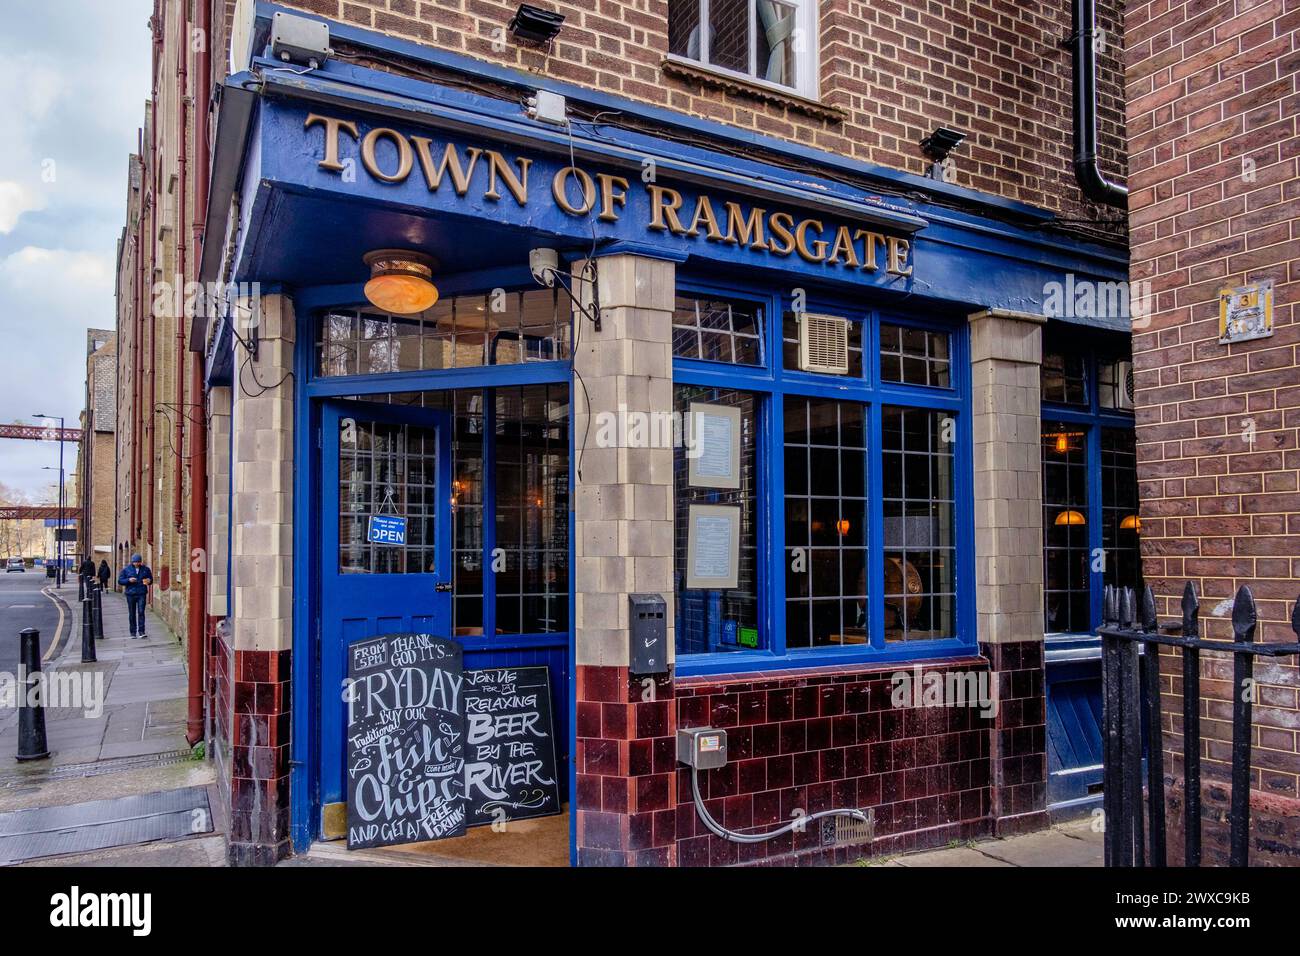 Town of Ramsgate Pub in Wapping Old Treppen, Wapping, East London, Großbritannien. Stockfoto